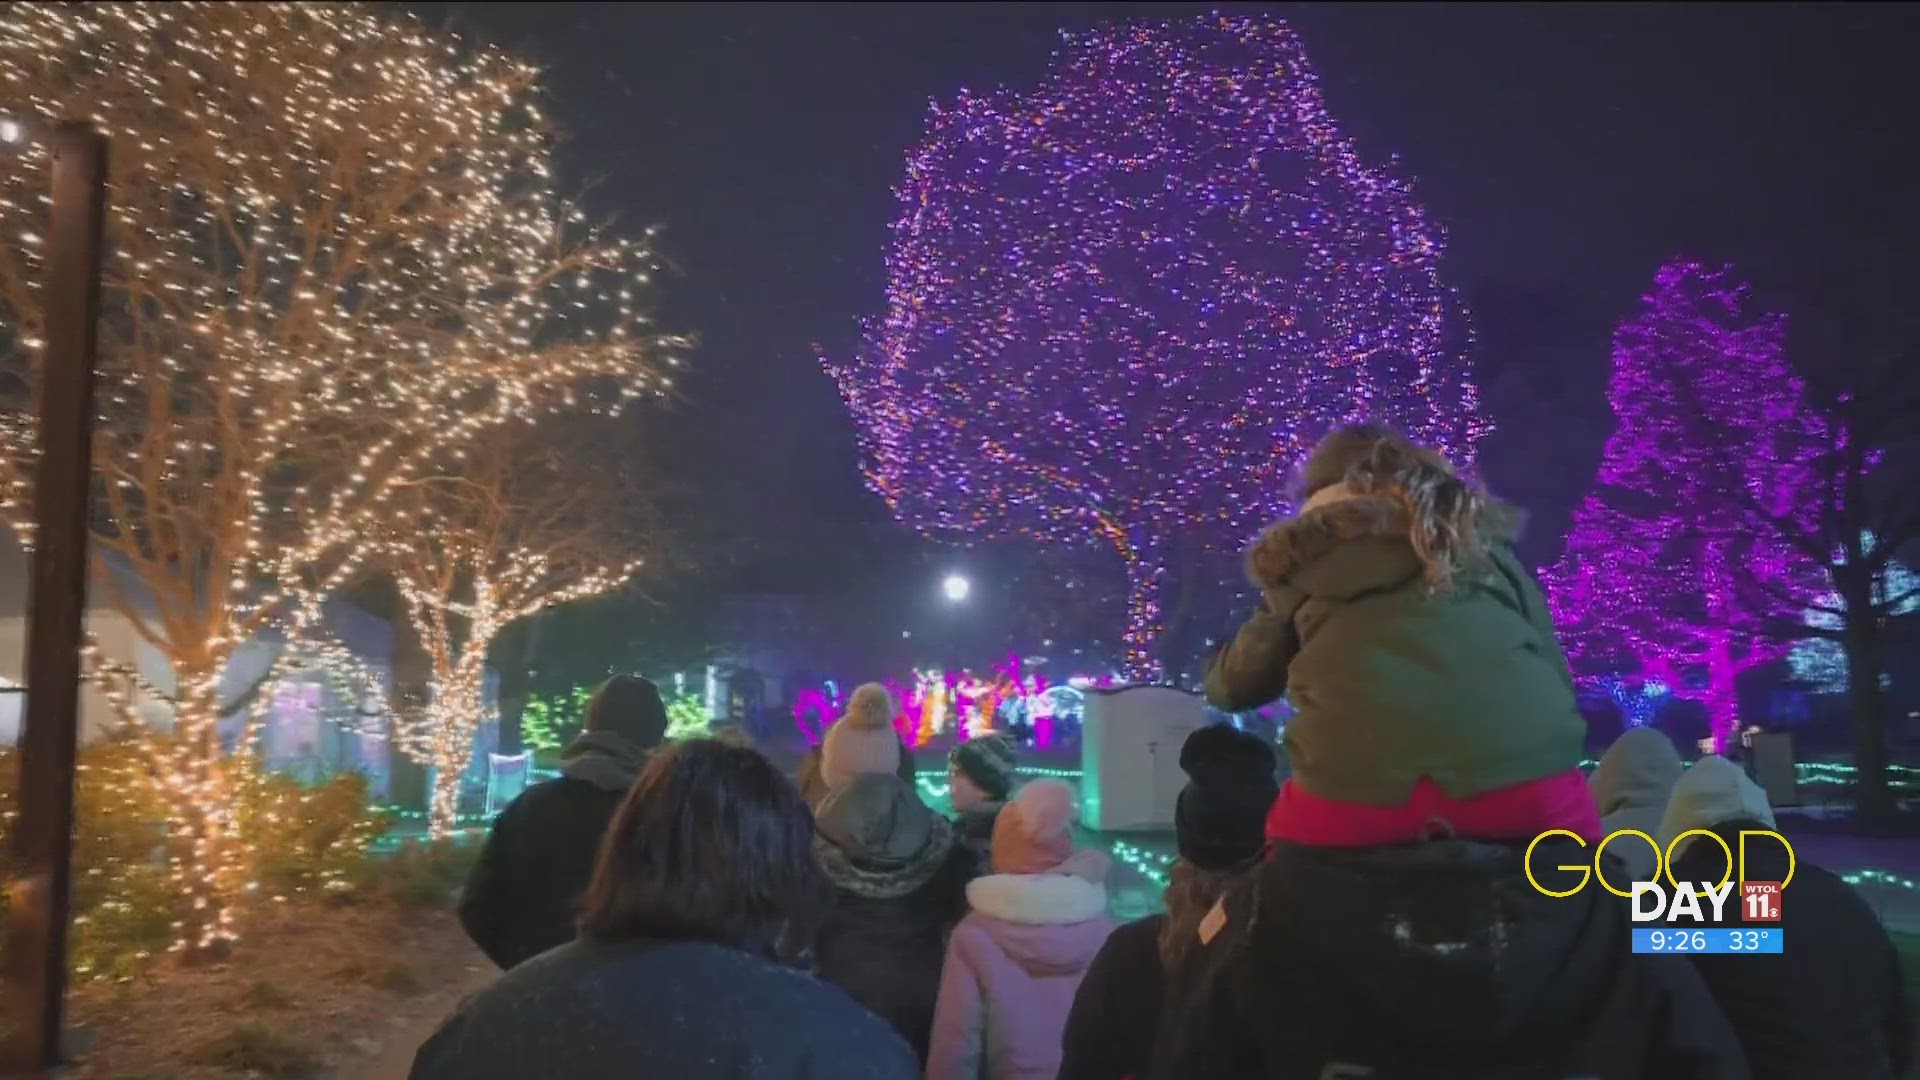 Mark Knierim of Key Bank, a longtime sponsor of Lights Before Christmas, talks the Toledo Zoo's holiday traditions - and how it's still going strong.